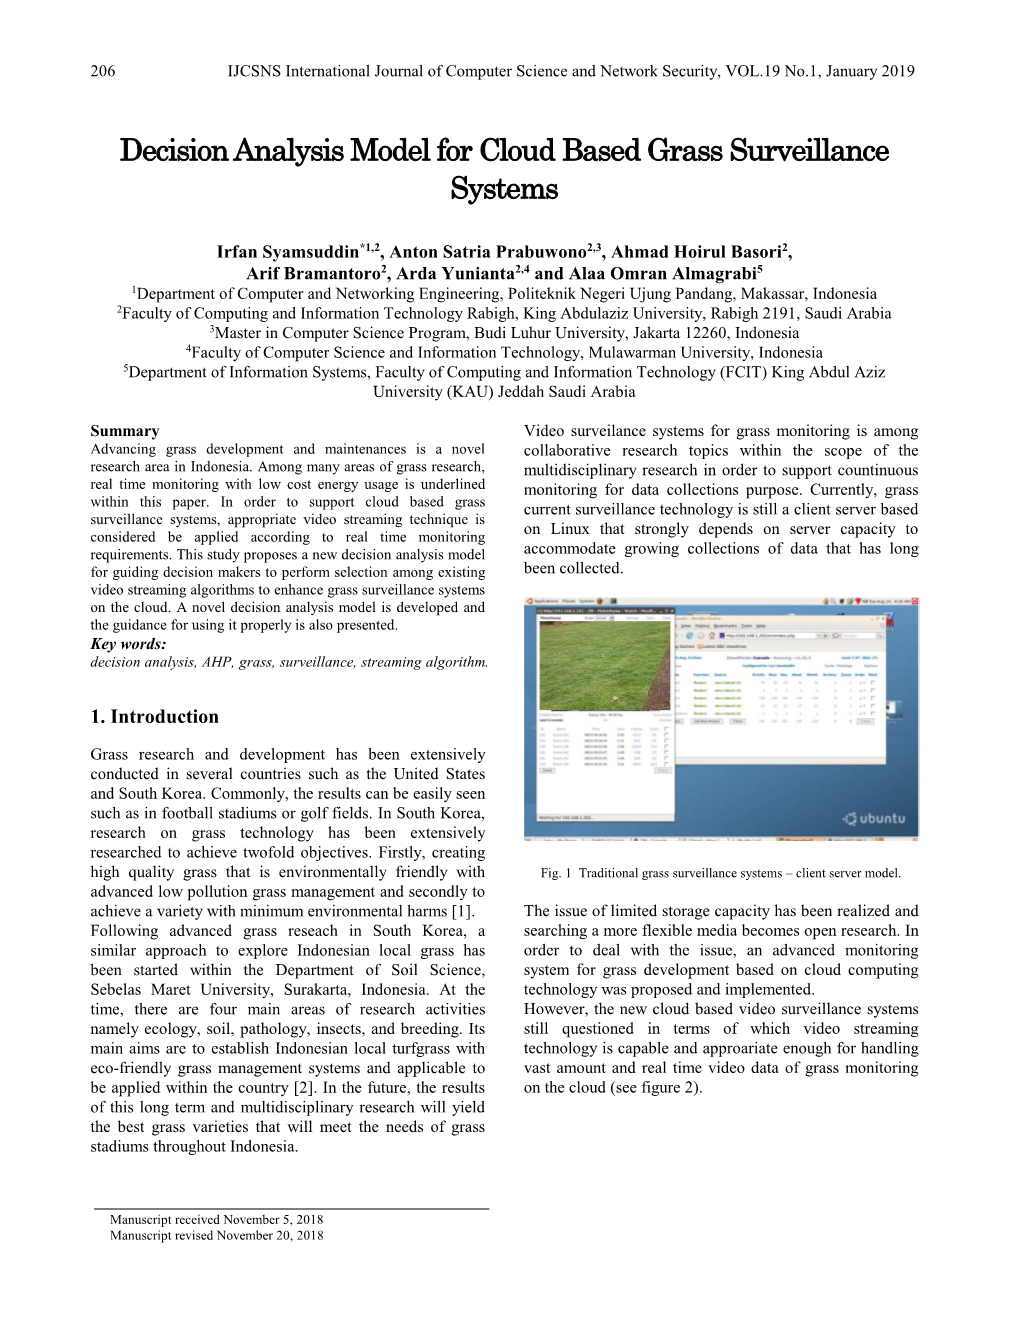 Decision Analysis Model for Cloud Based Grass Surveillance Systems